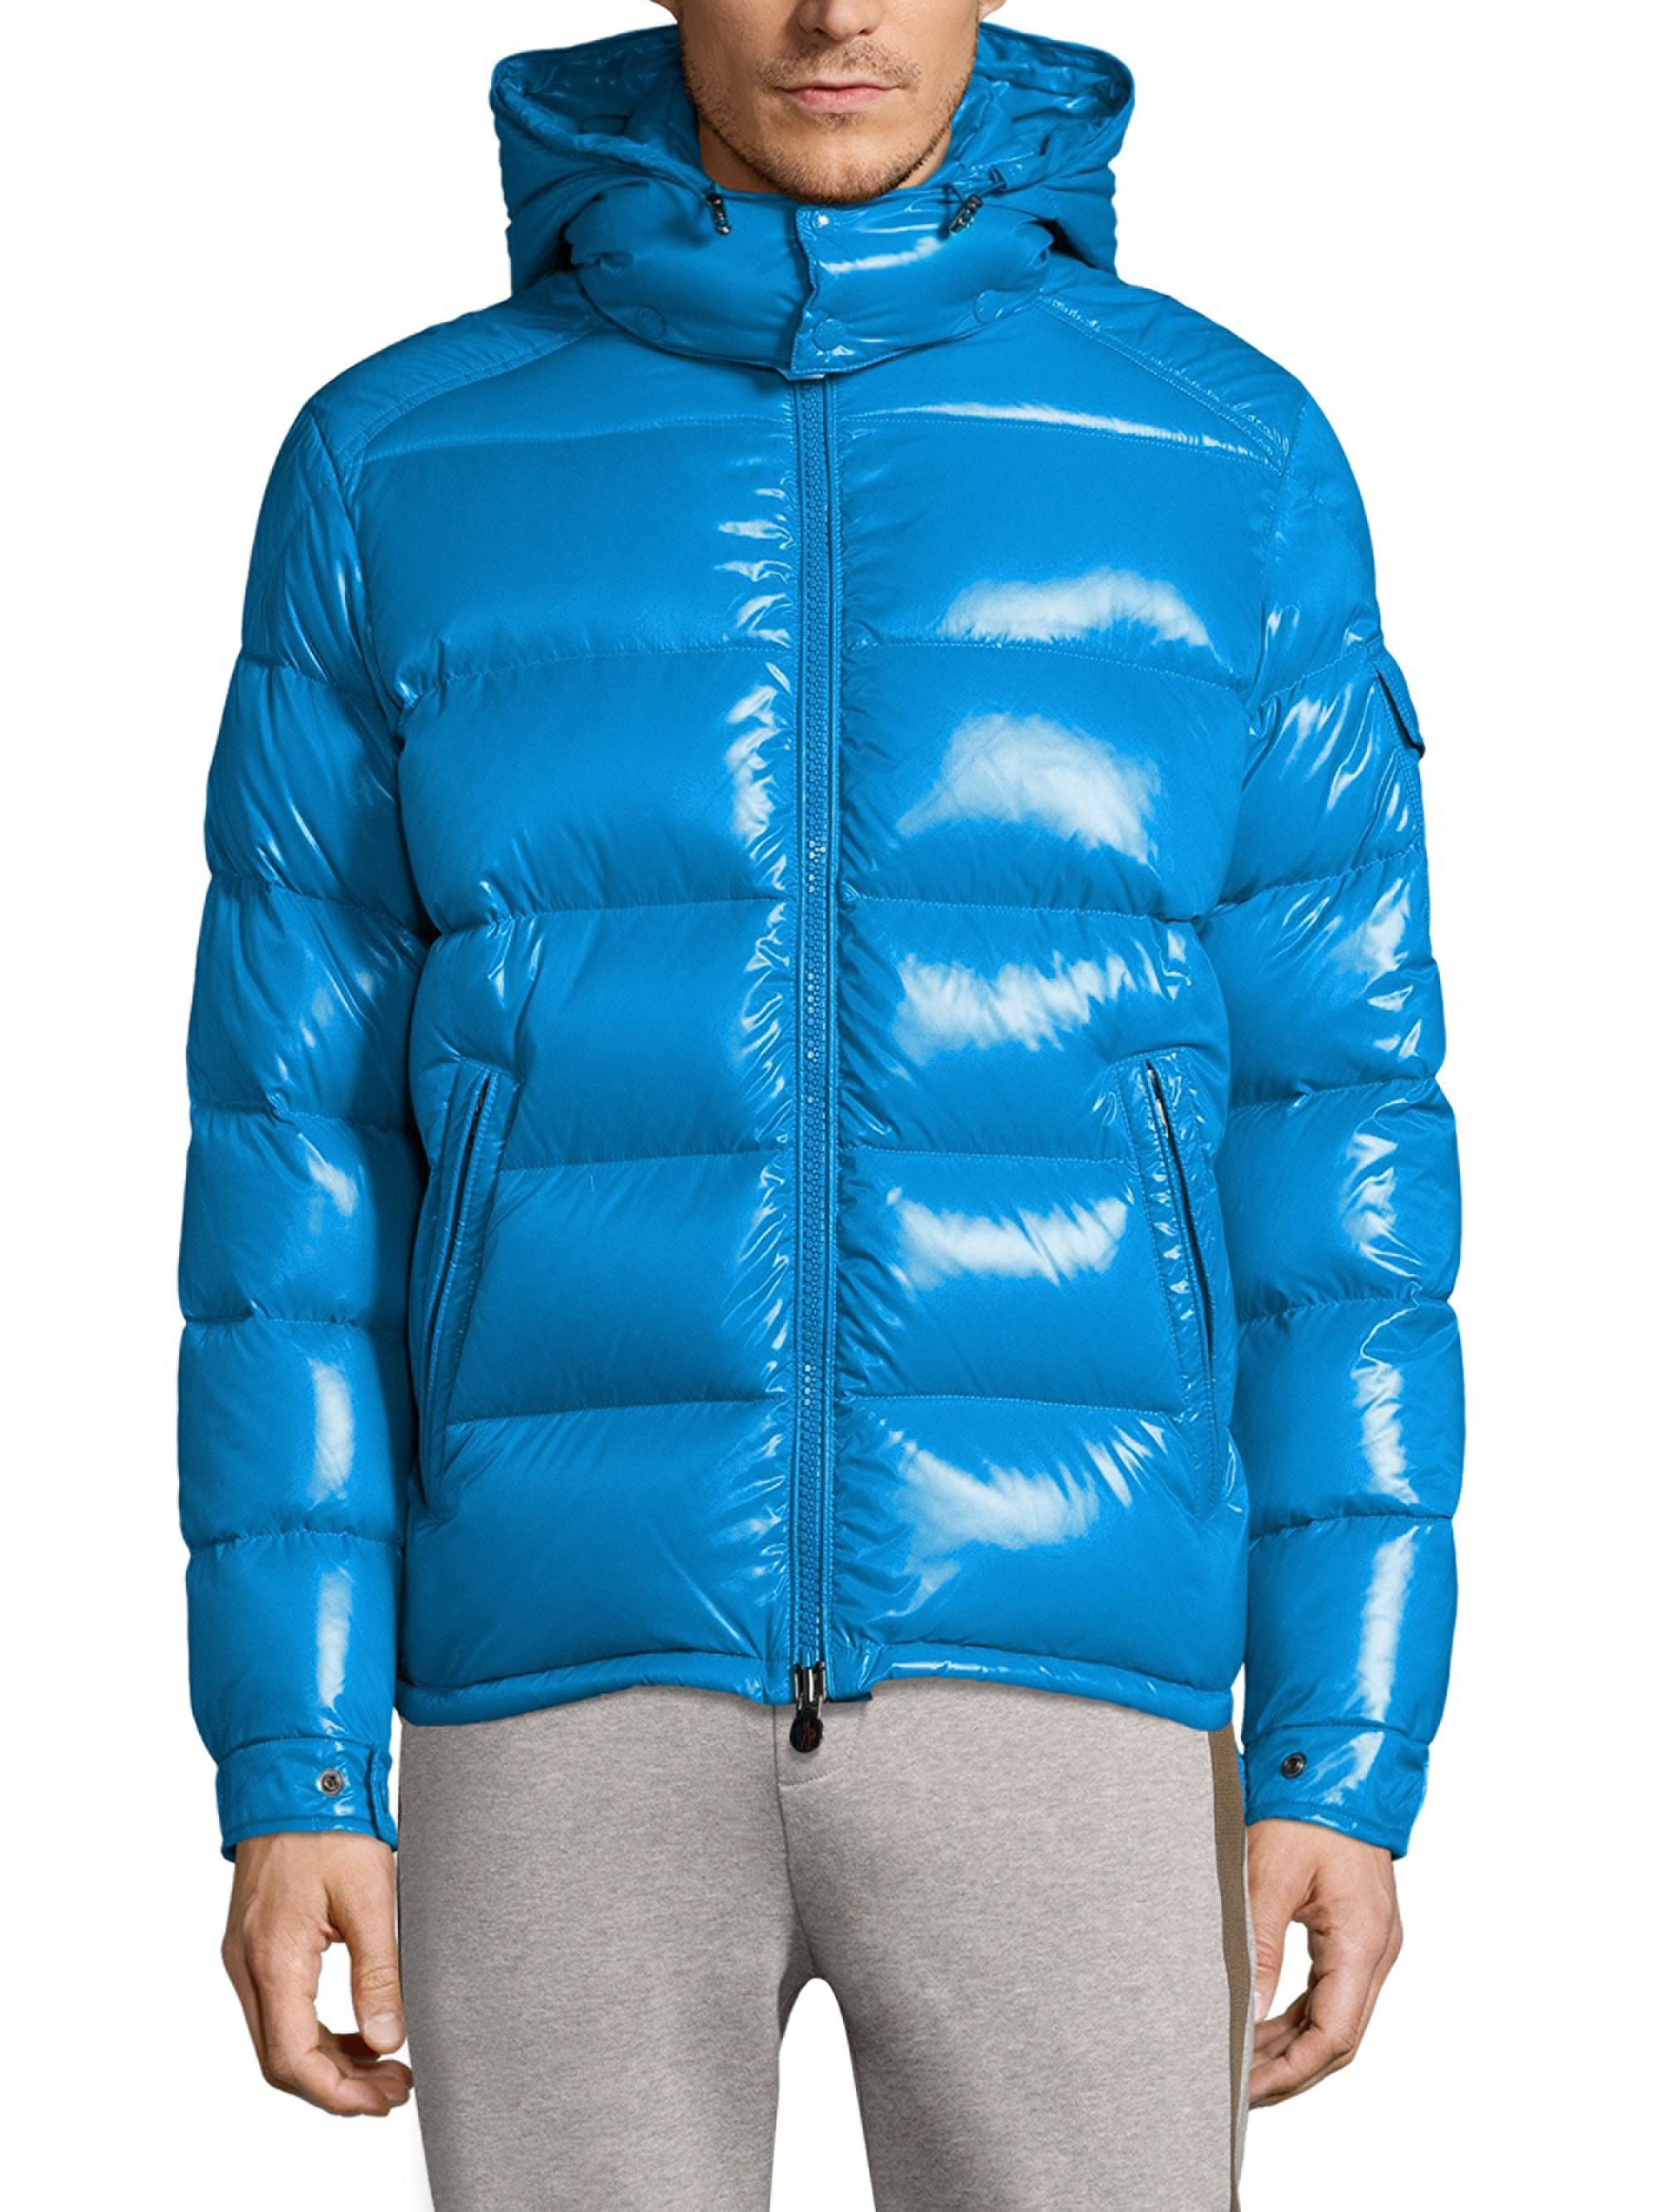 Moncler Synthetic Maya Hooded Puffer Jacket in Blue for Men - Lyst